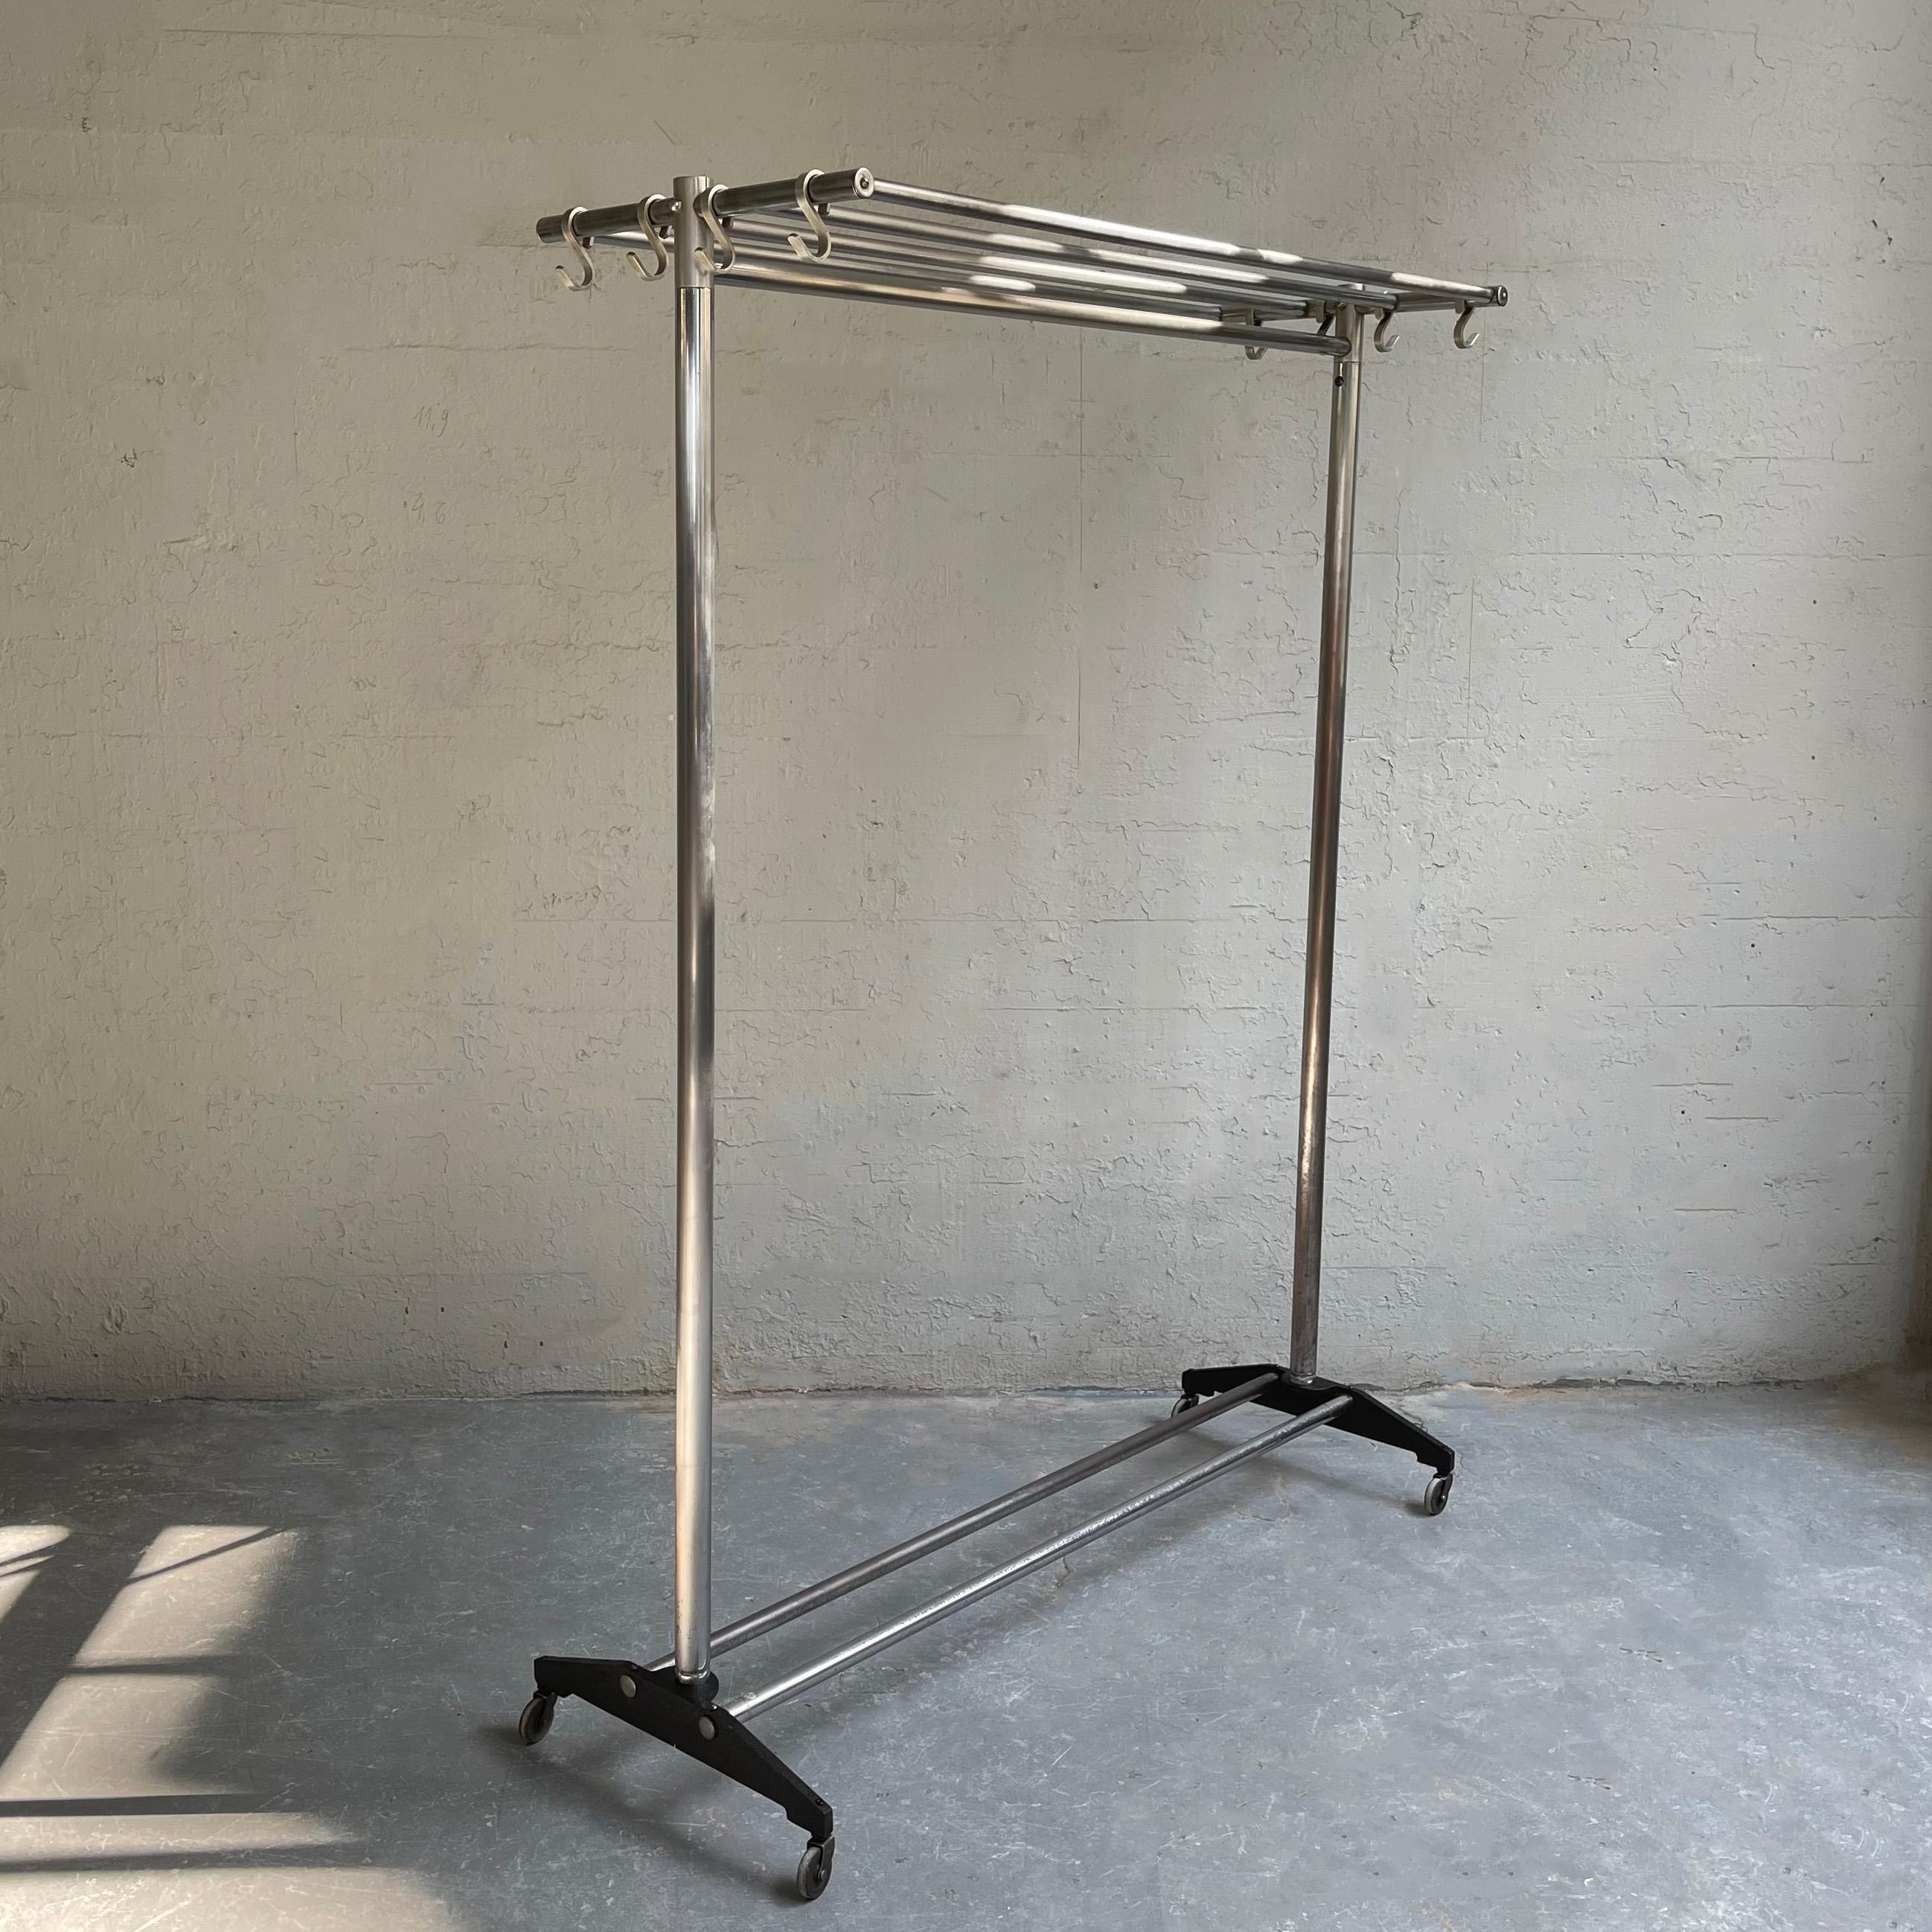 Machine-age, midcentry, steel and chrome plated steel, rolling garment rack features a tubular slat top shelf with 